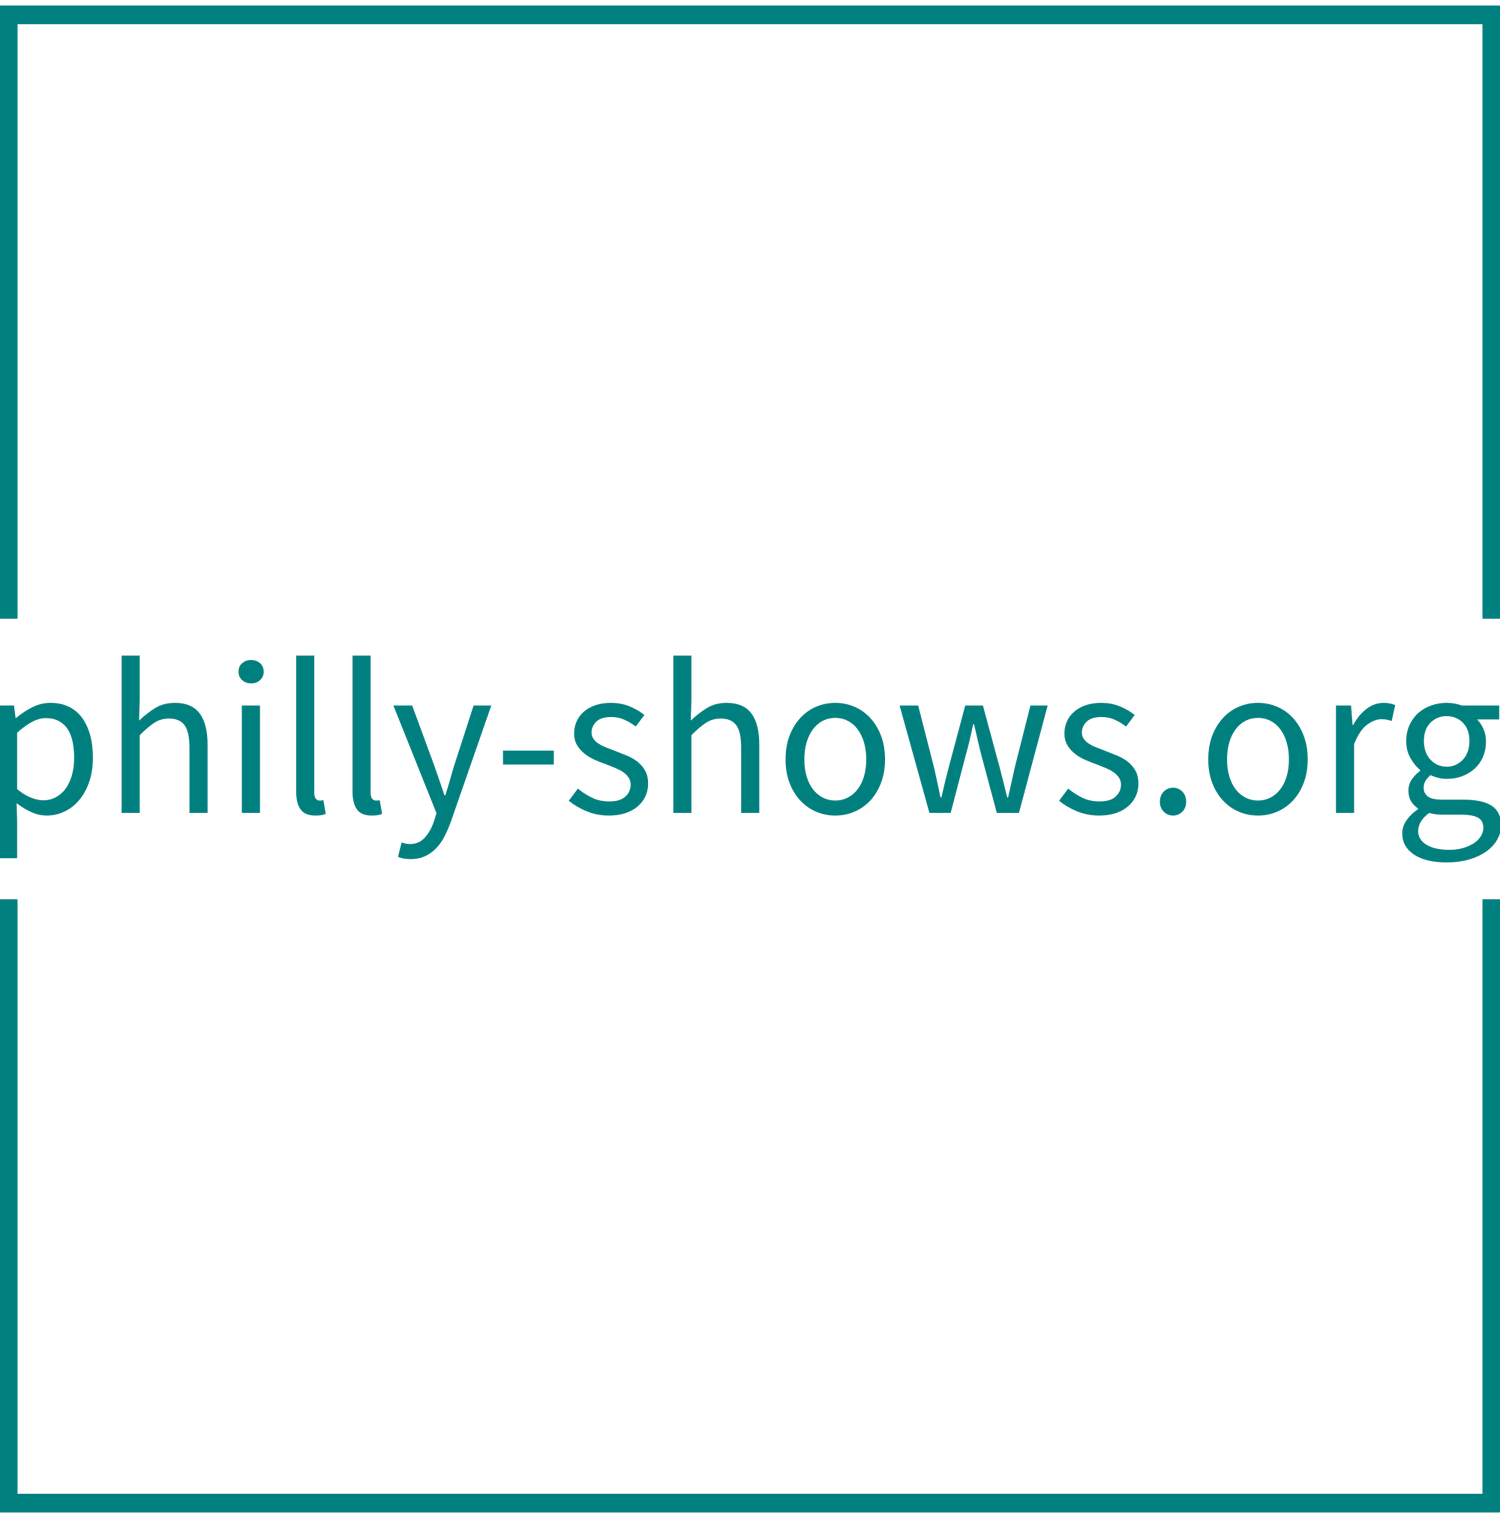 philly-shows.org